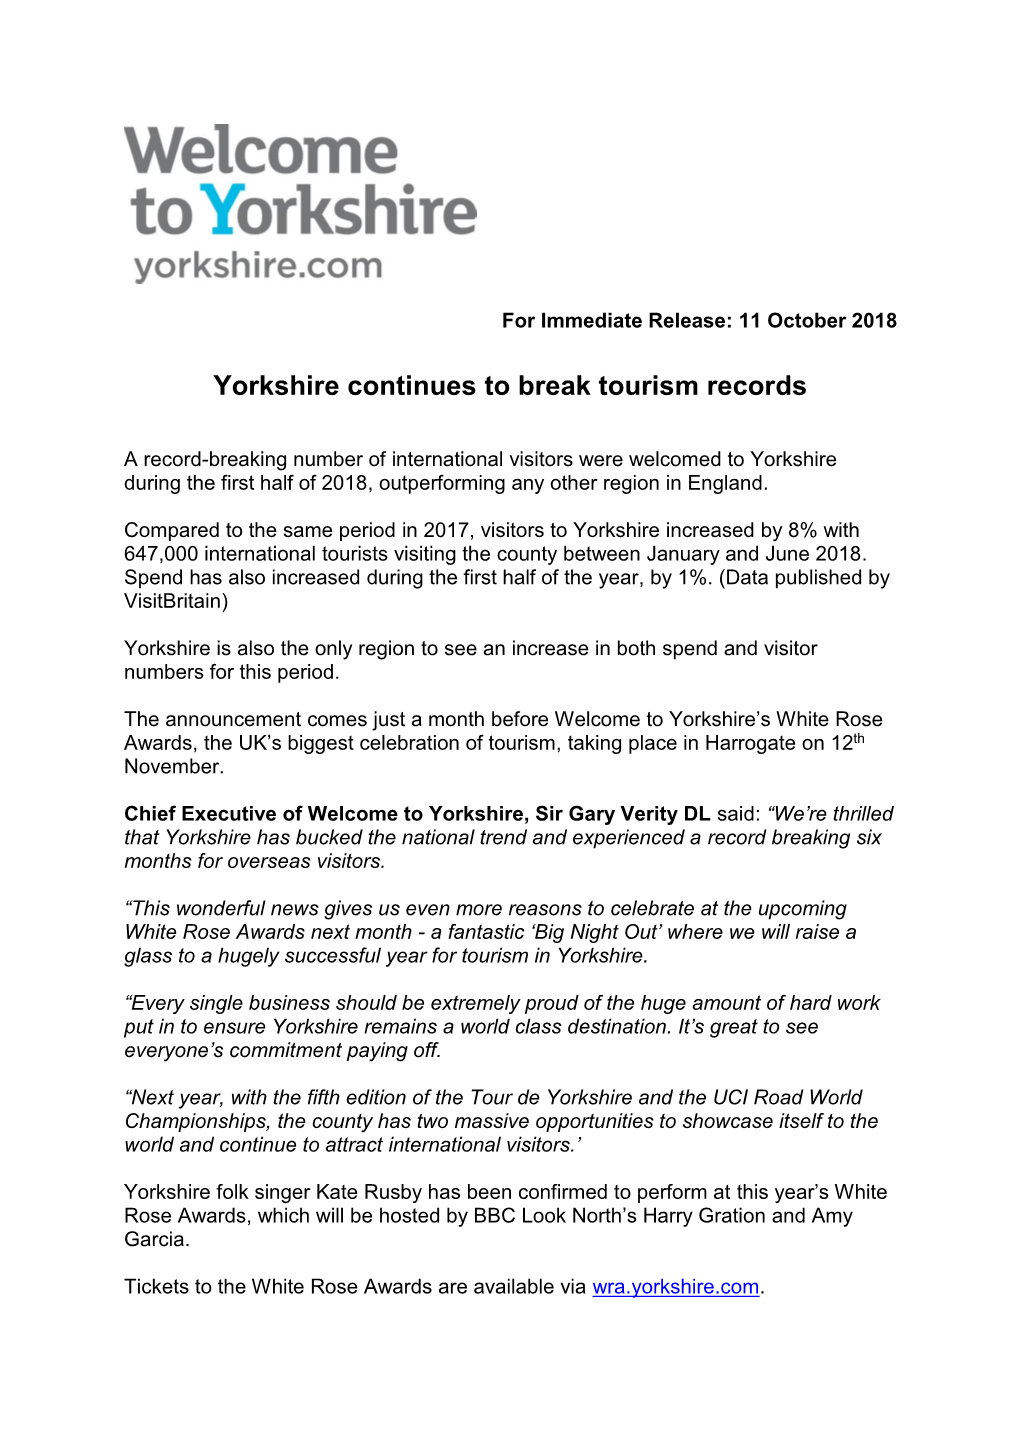 Press Releases Yorkshire Continues to Break Tourism Records a Record-Breaking Number of International Visitors Were